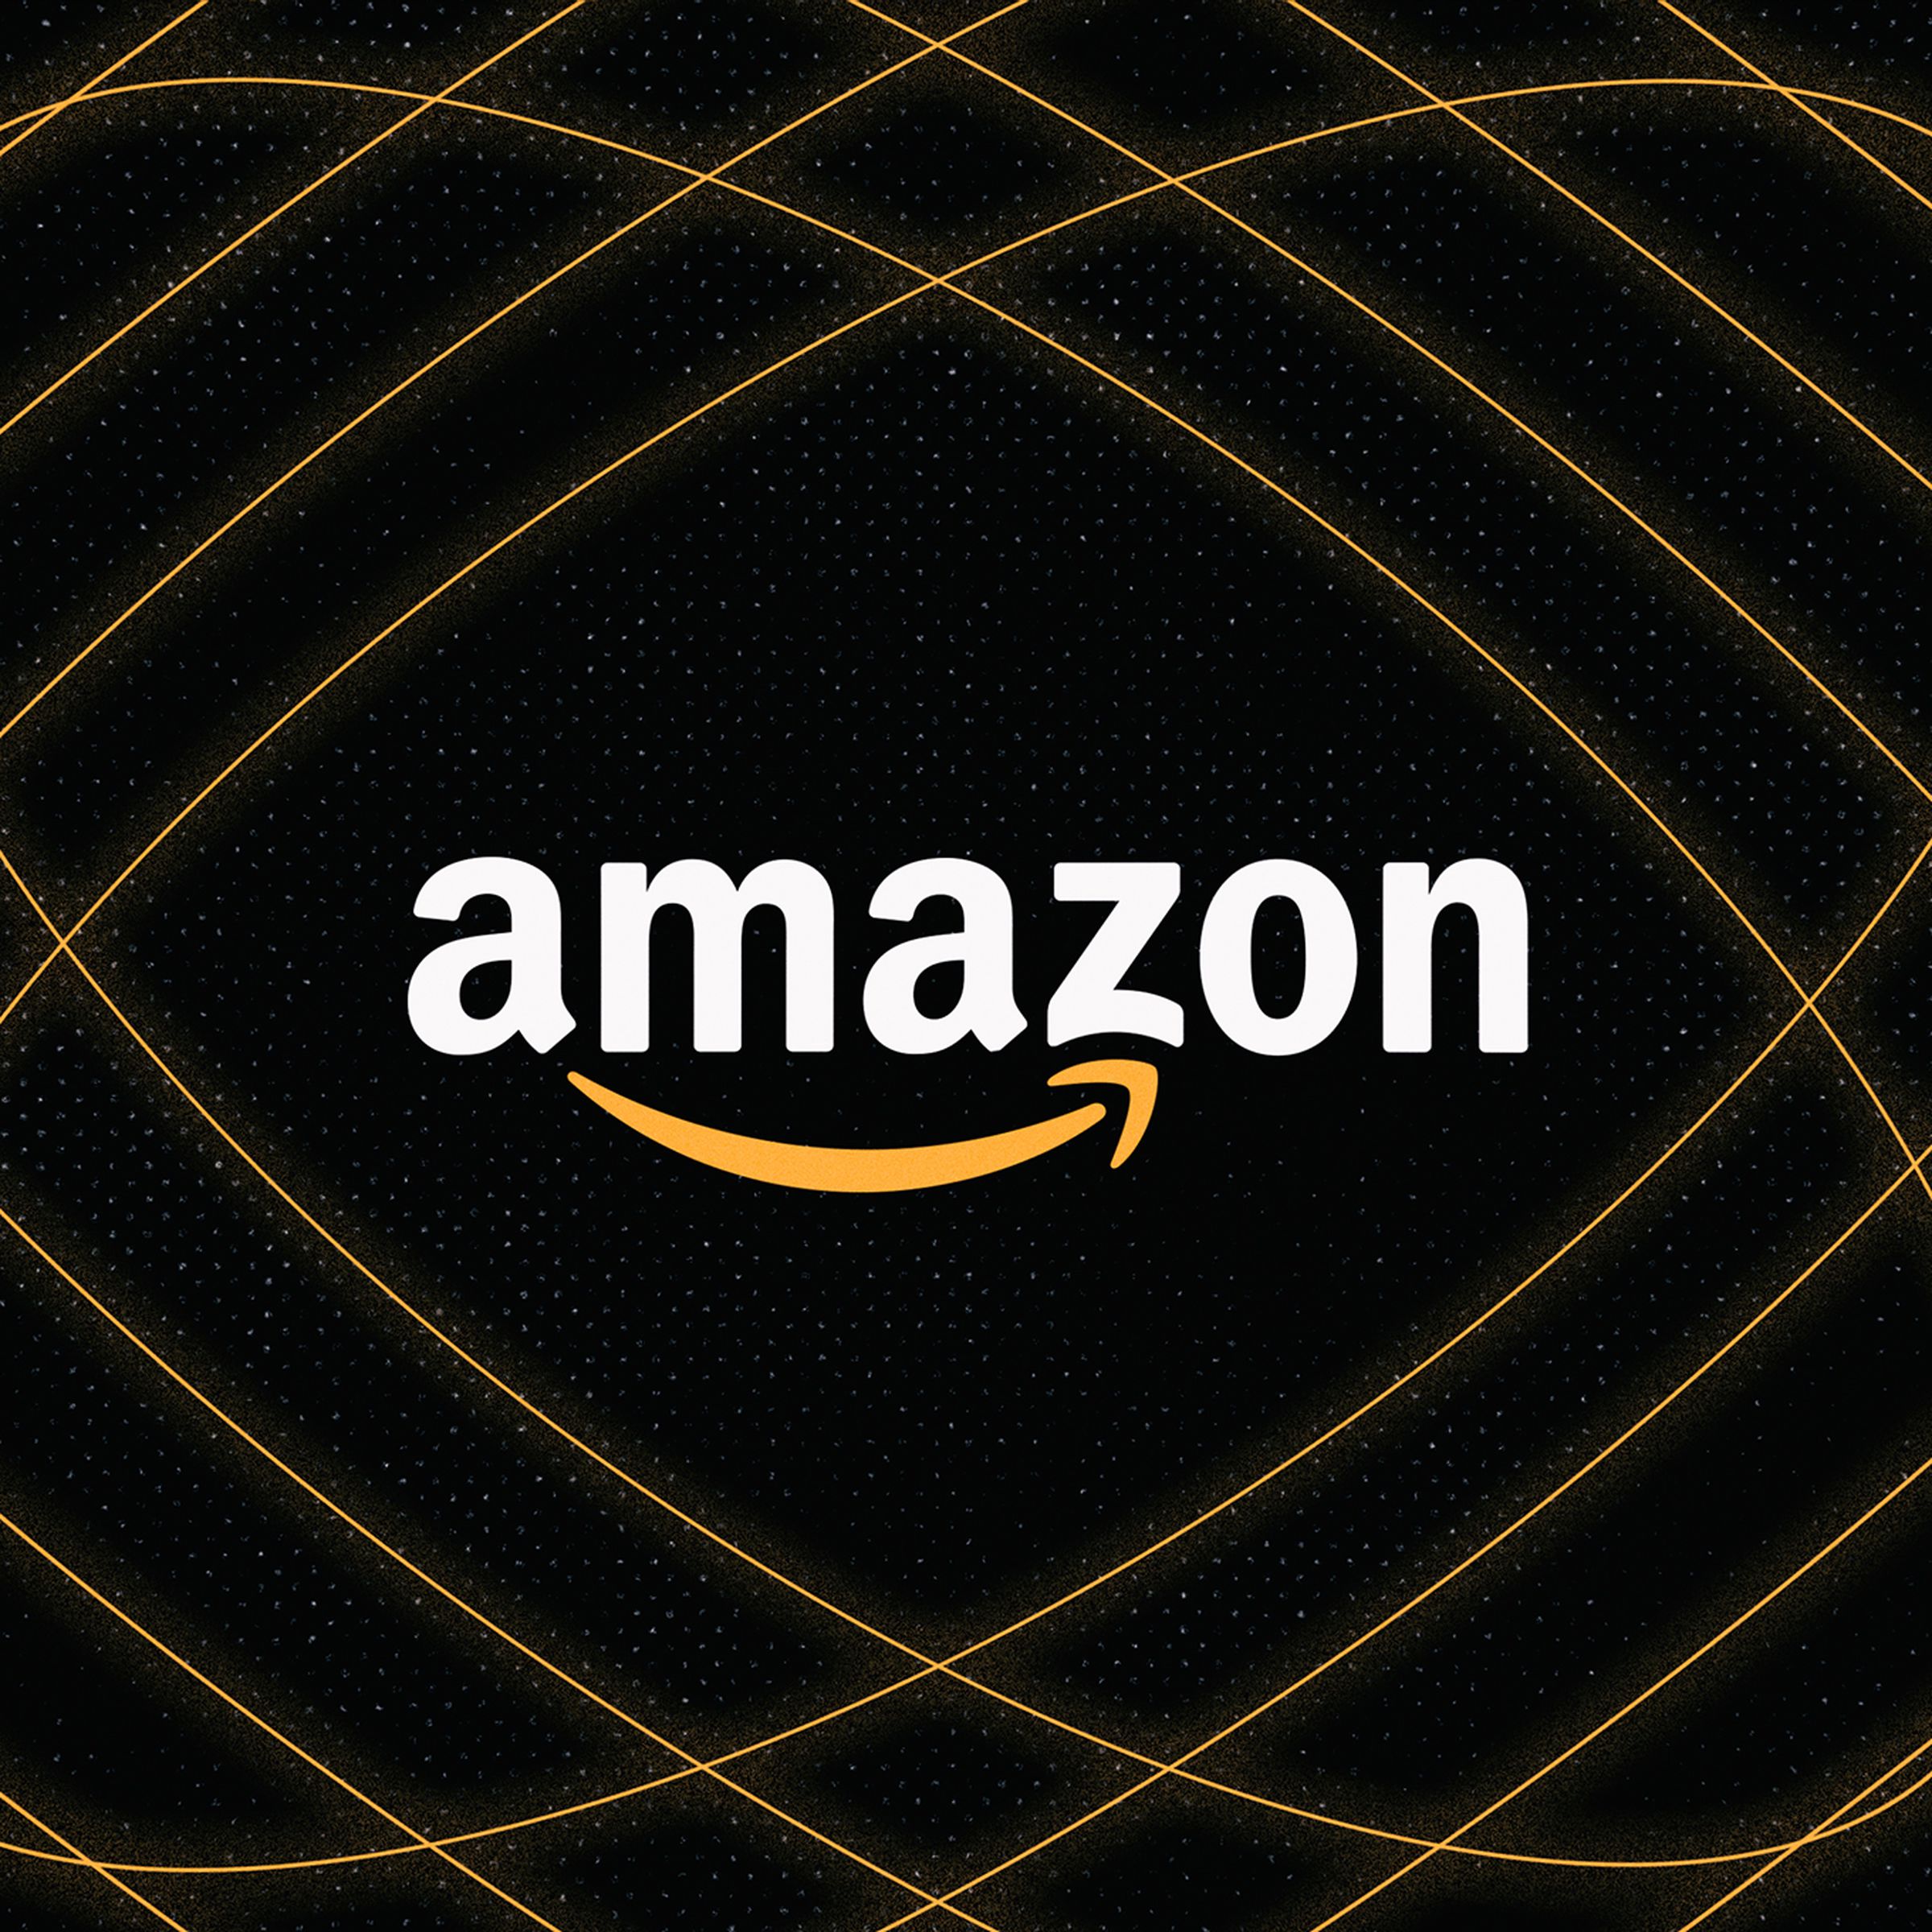 The Amazon logo over a black background with orange lines